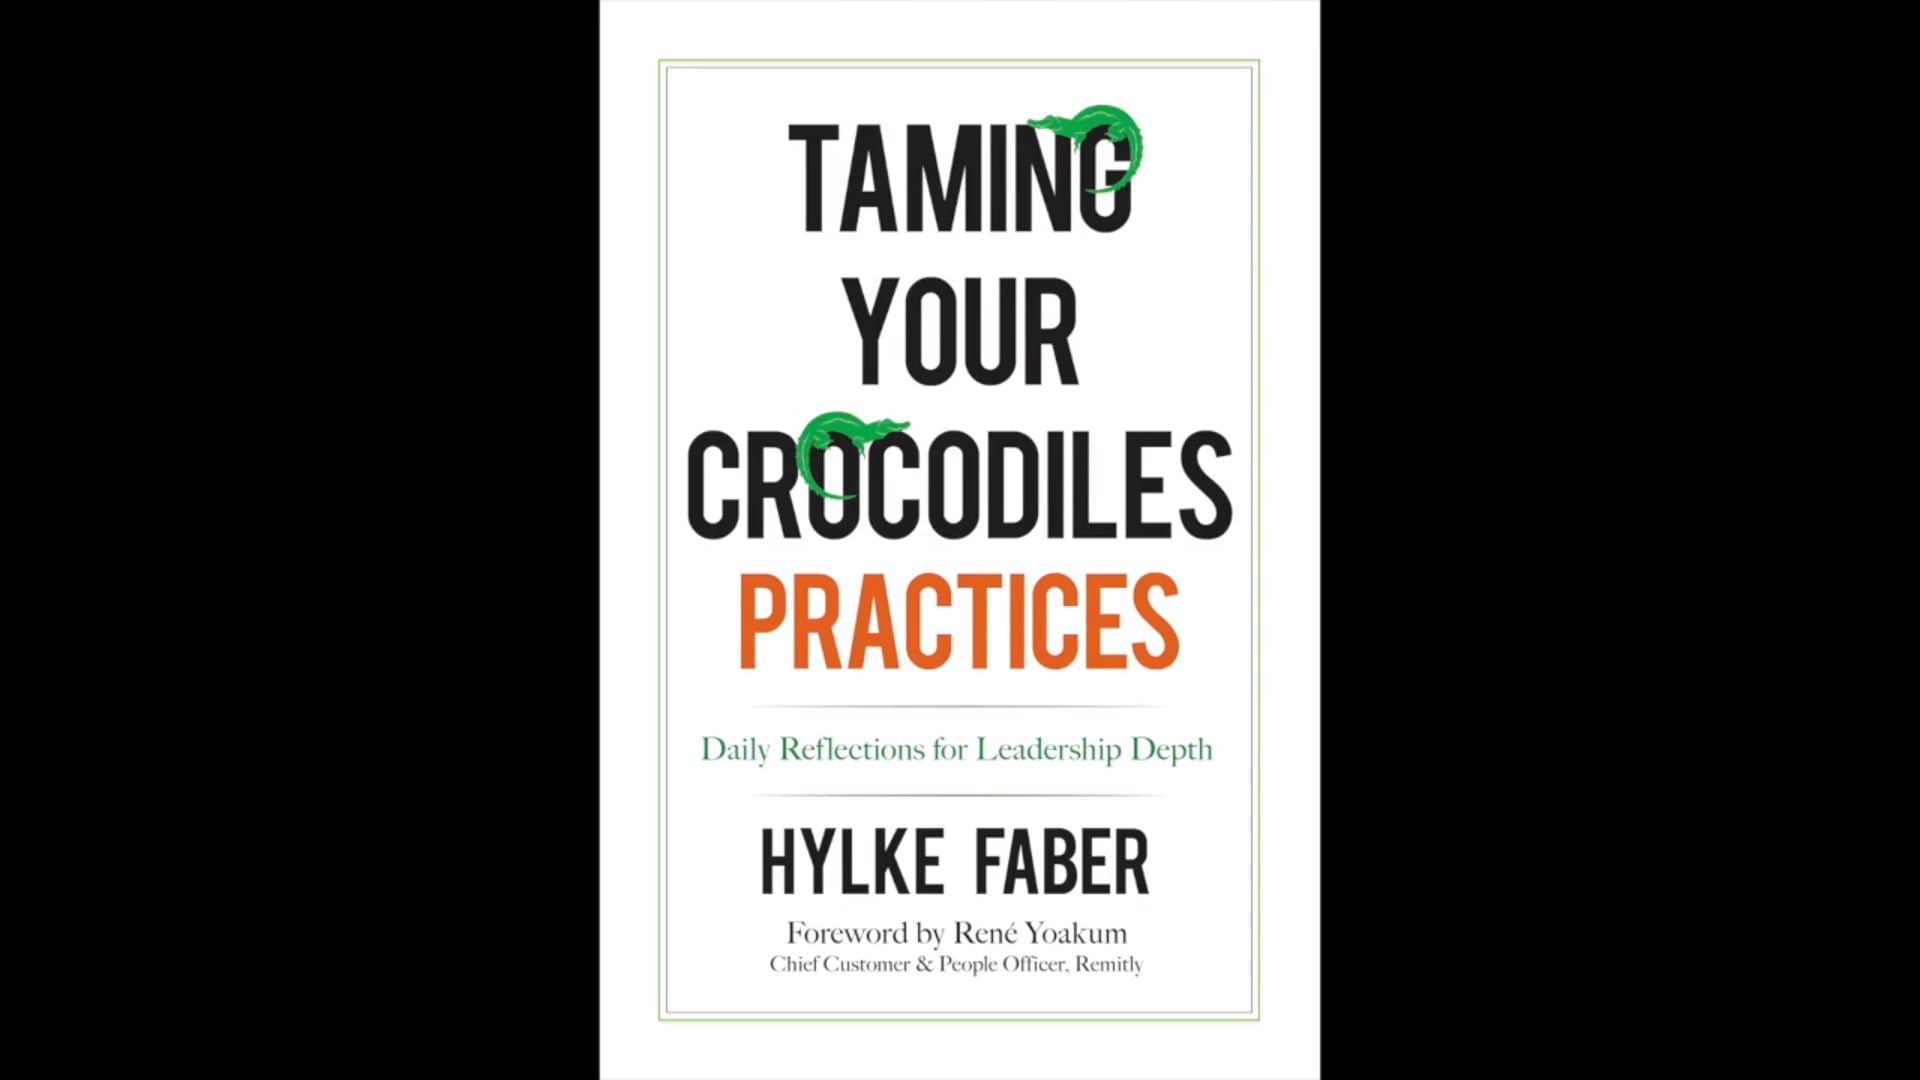 Taming Your Crocodiles Practices: Daily Reflections for Leadership Depth